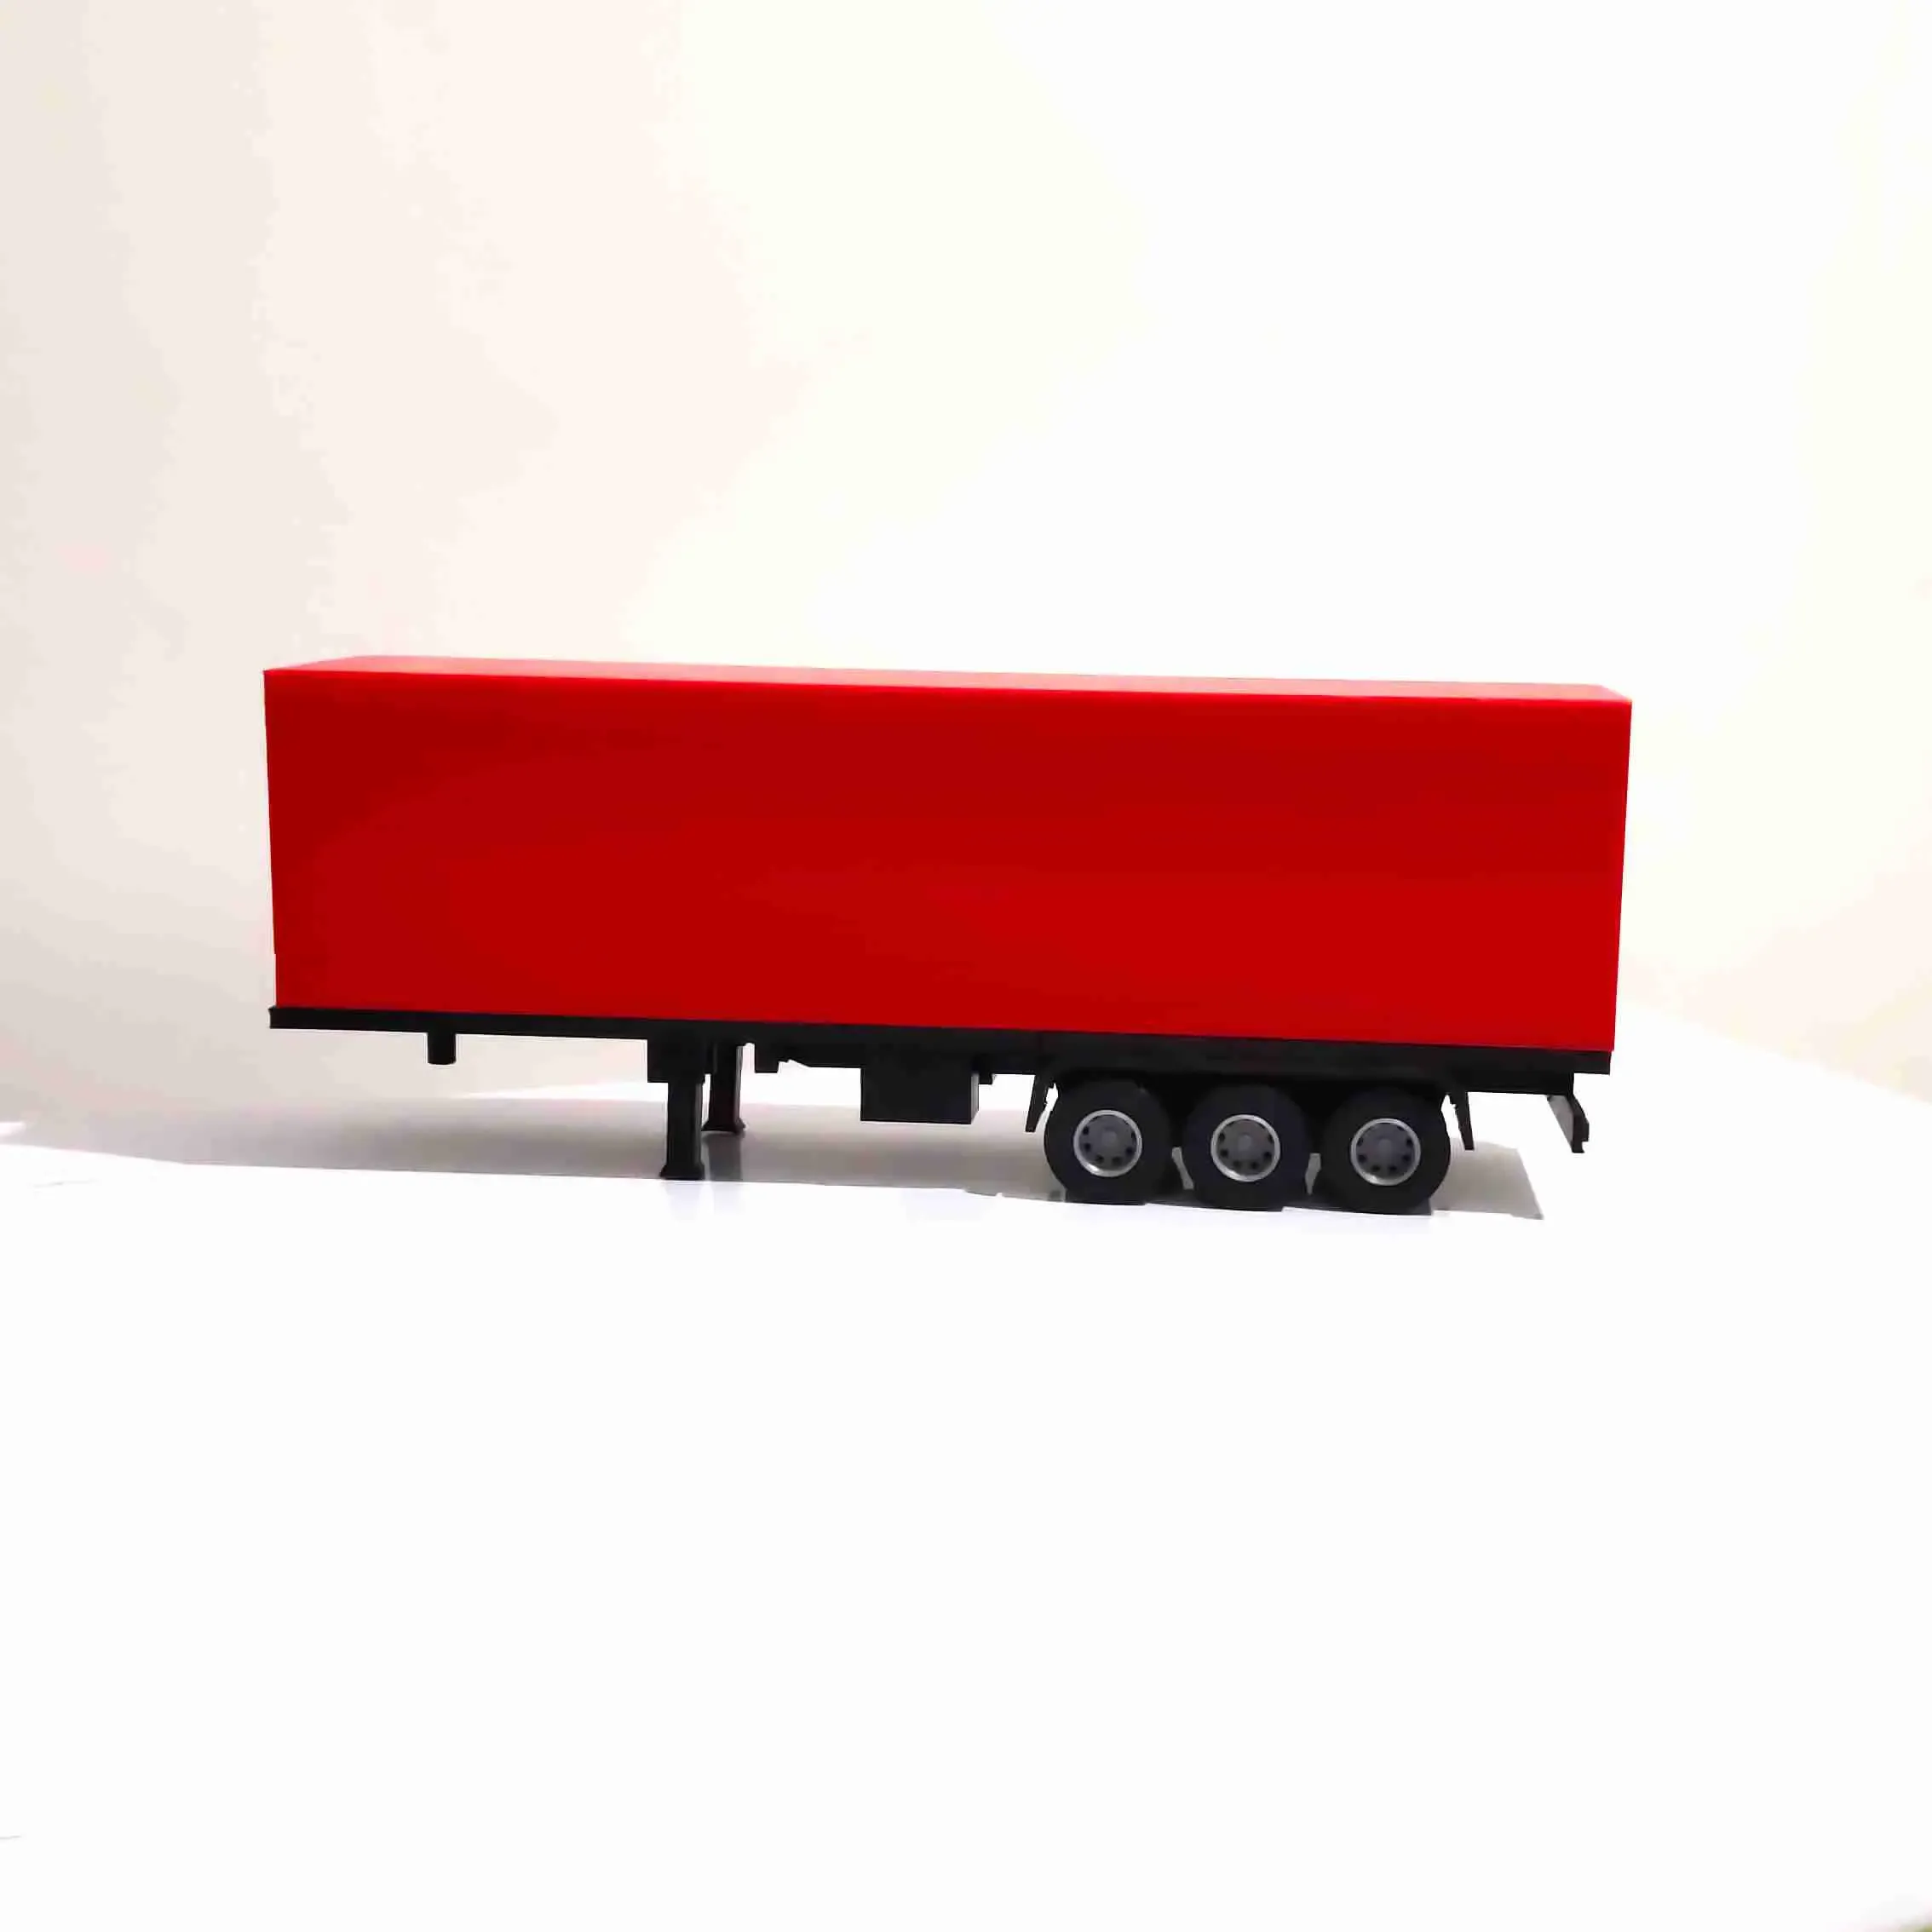 MERCEDES TRUCK AND TRAILER